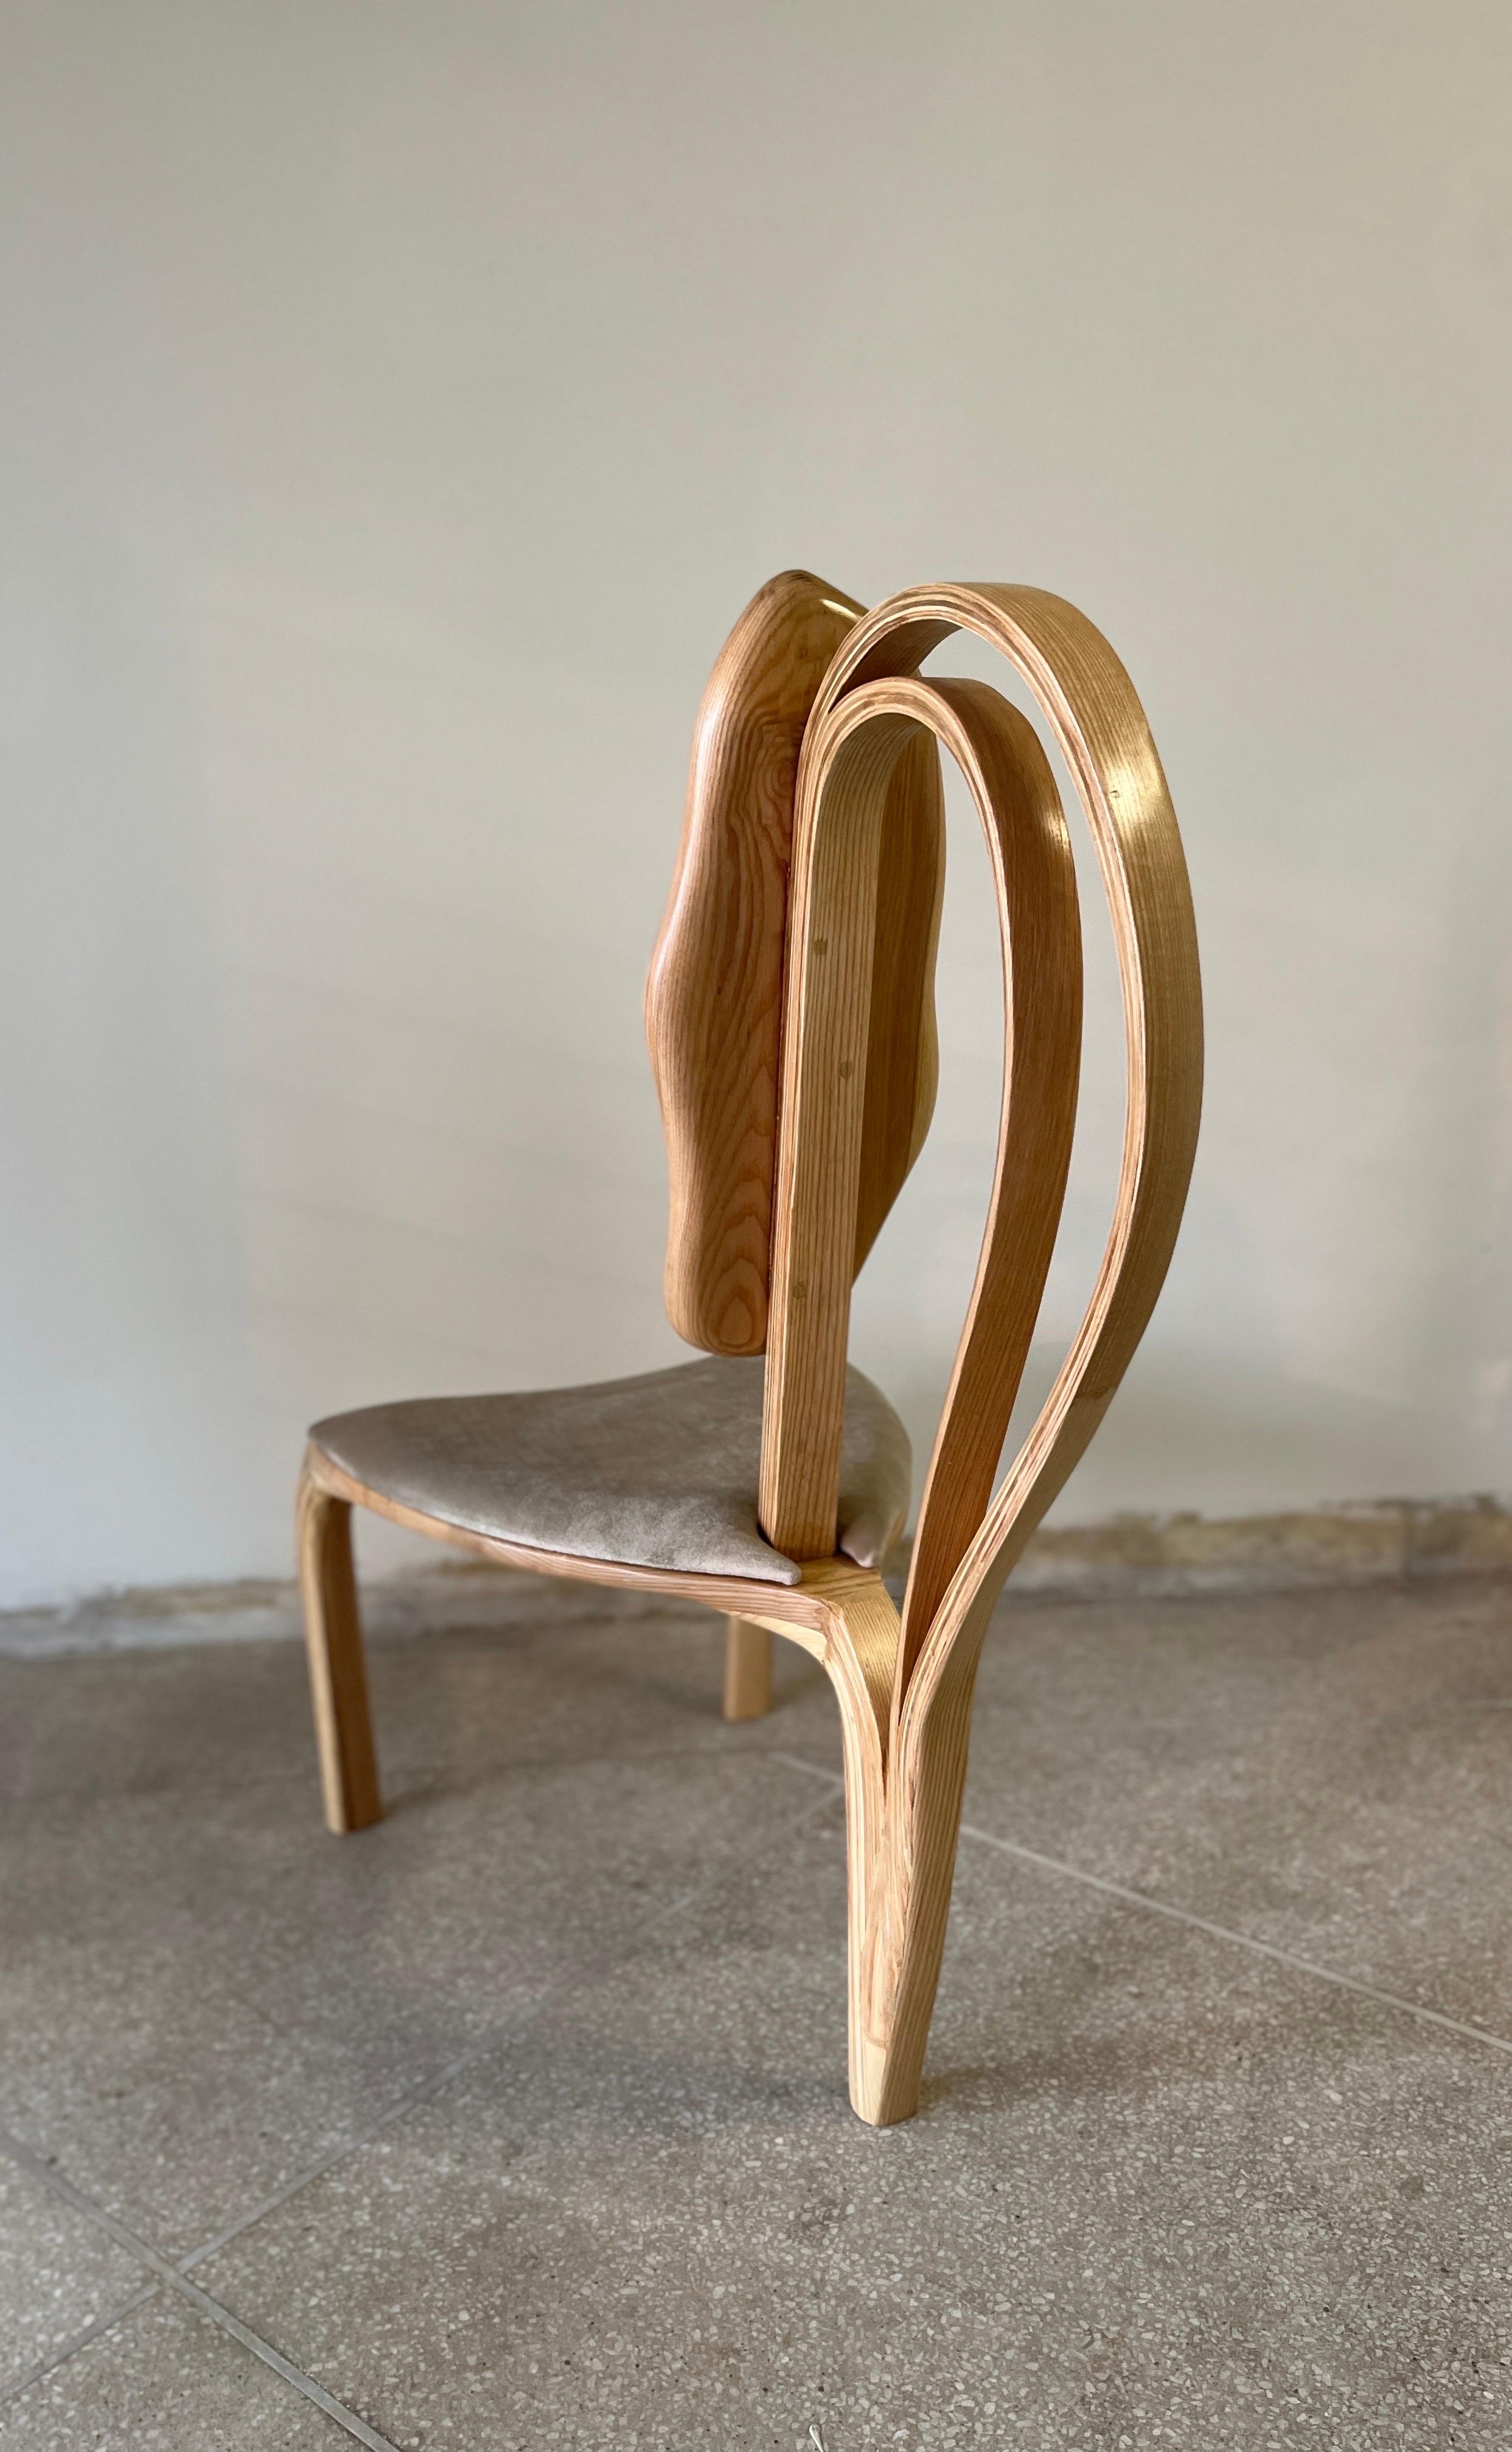 This is the Dining Chair No. 1 of the Fluentum Series of works. 

The Dining Chair No.1  has a free-form design; the wood bends and curves with beautiful flows to create the design. The handcrafted details on the piece such as the curves, varying